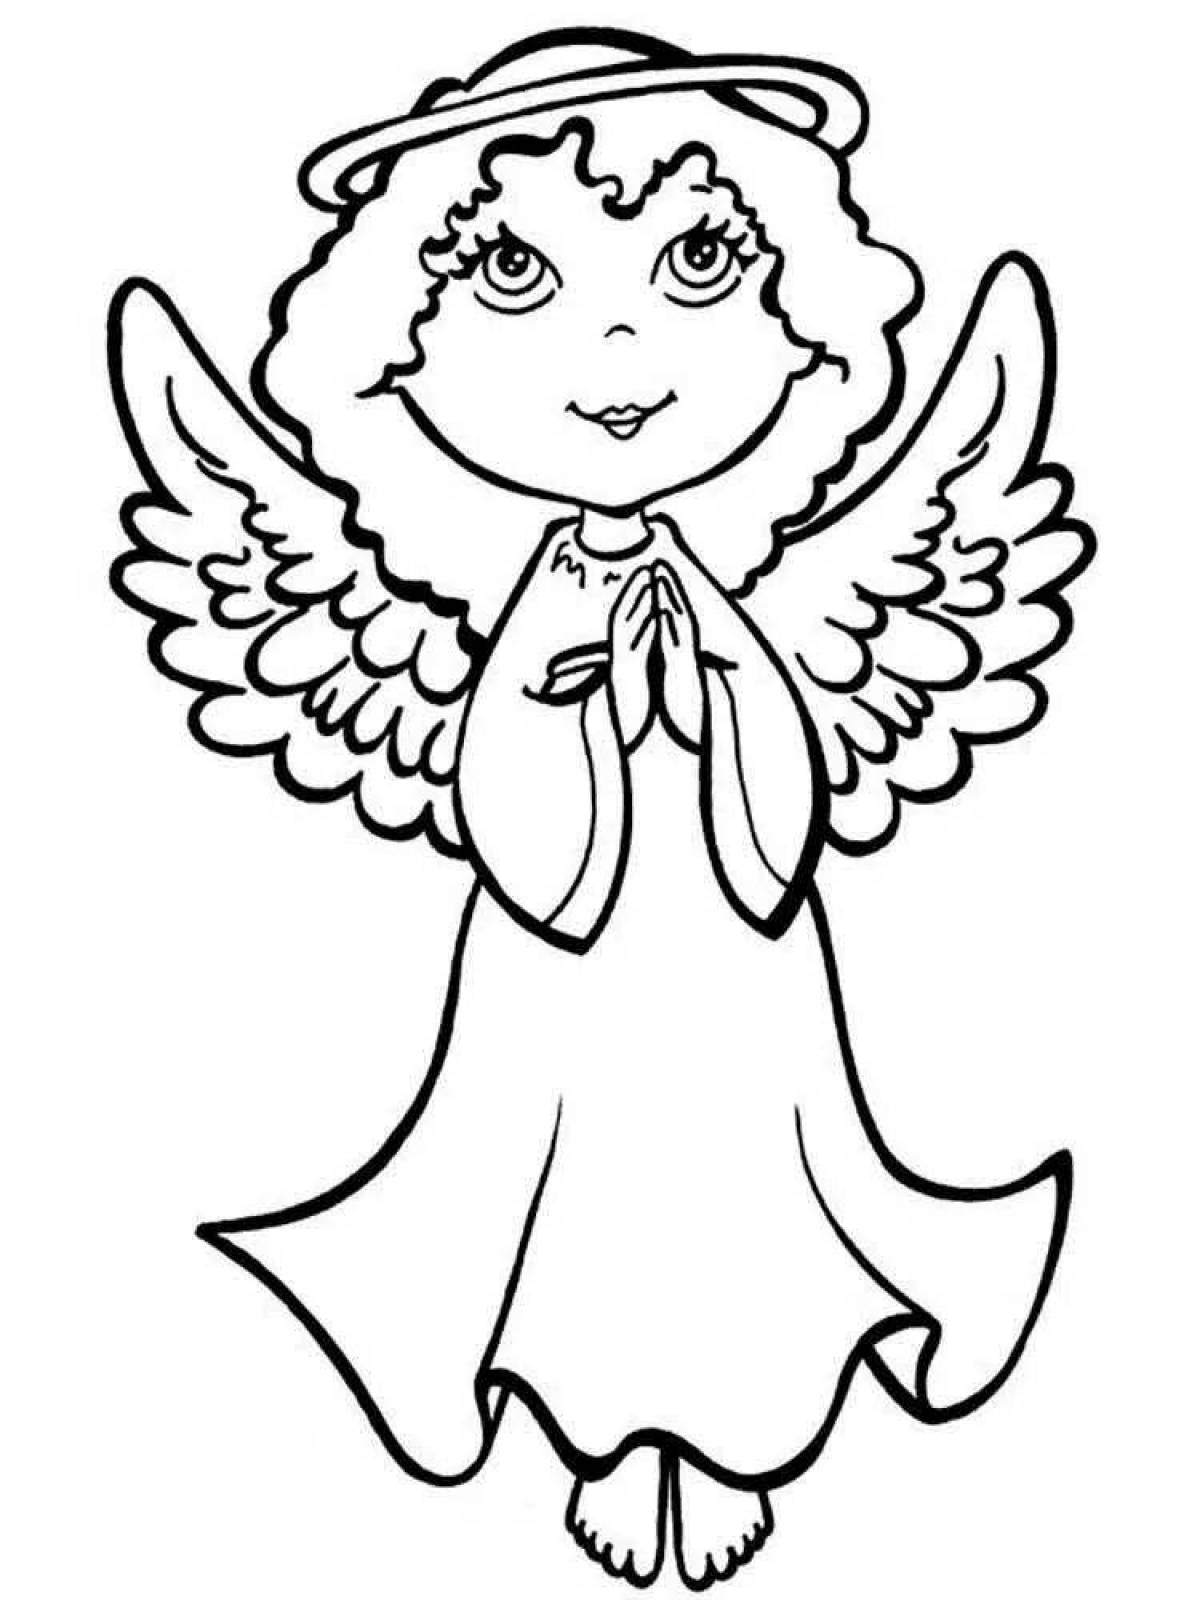 Cute little angel coloring book